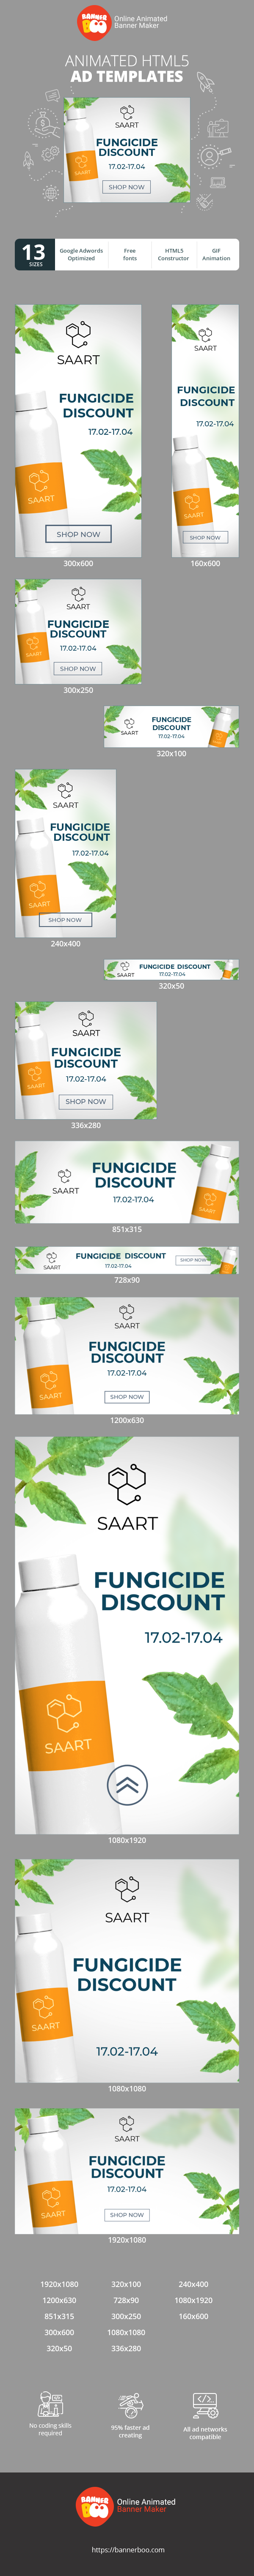 Banner ad template — Fungicide Discount 17.02 - 17.04 — Agriculture